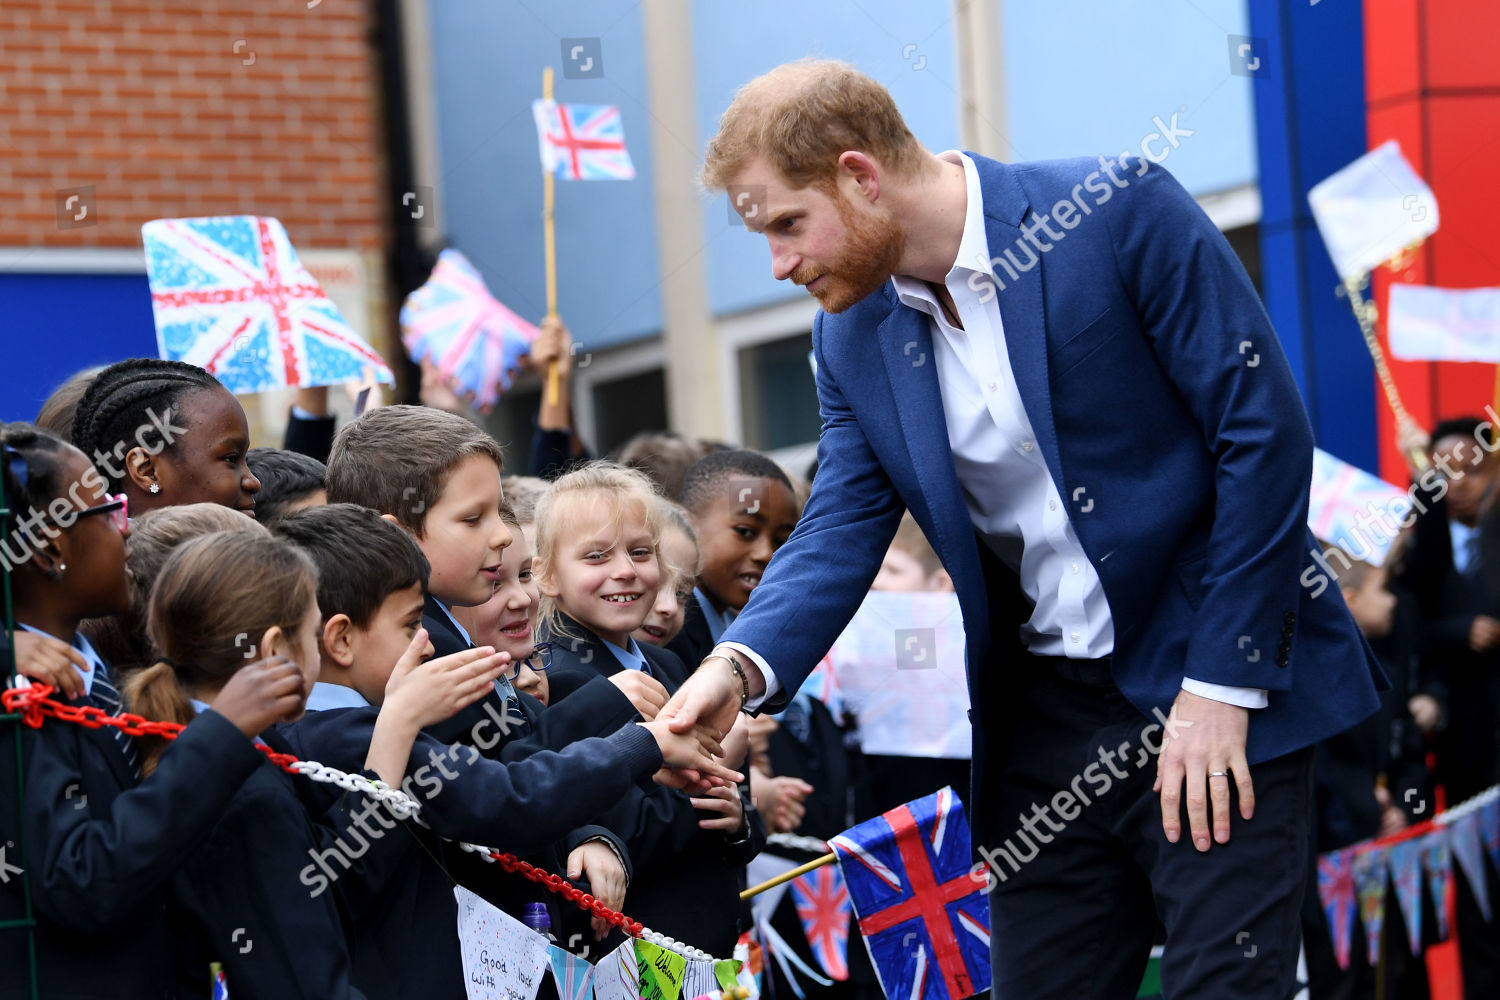 prince-harry-visits-st-vincents-catholic-primary-school-for-commonwealth-canopy-and-woodland-trust-tree-planting-ceremony-london-uk-shutterstock-editorial-10160984ak.jpg